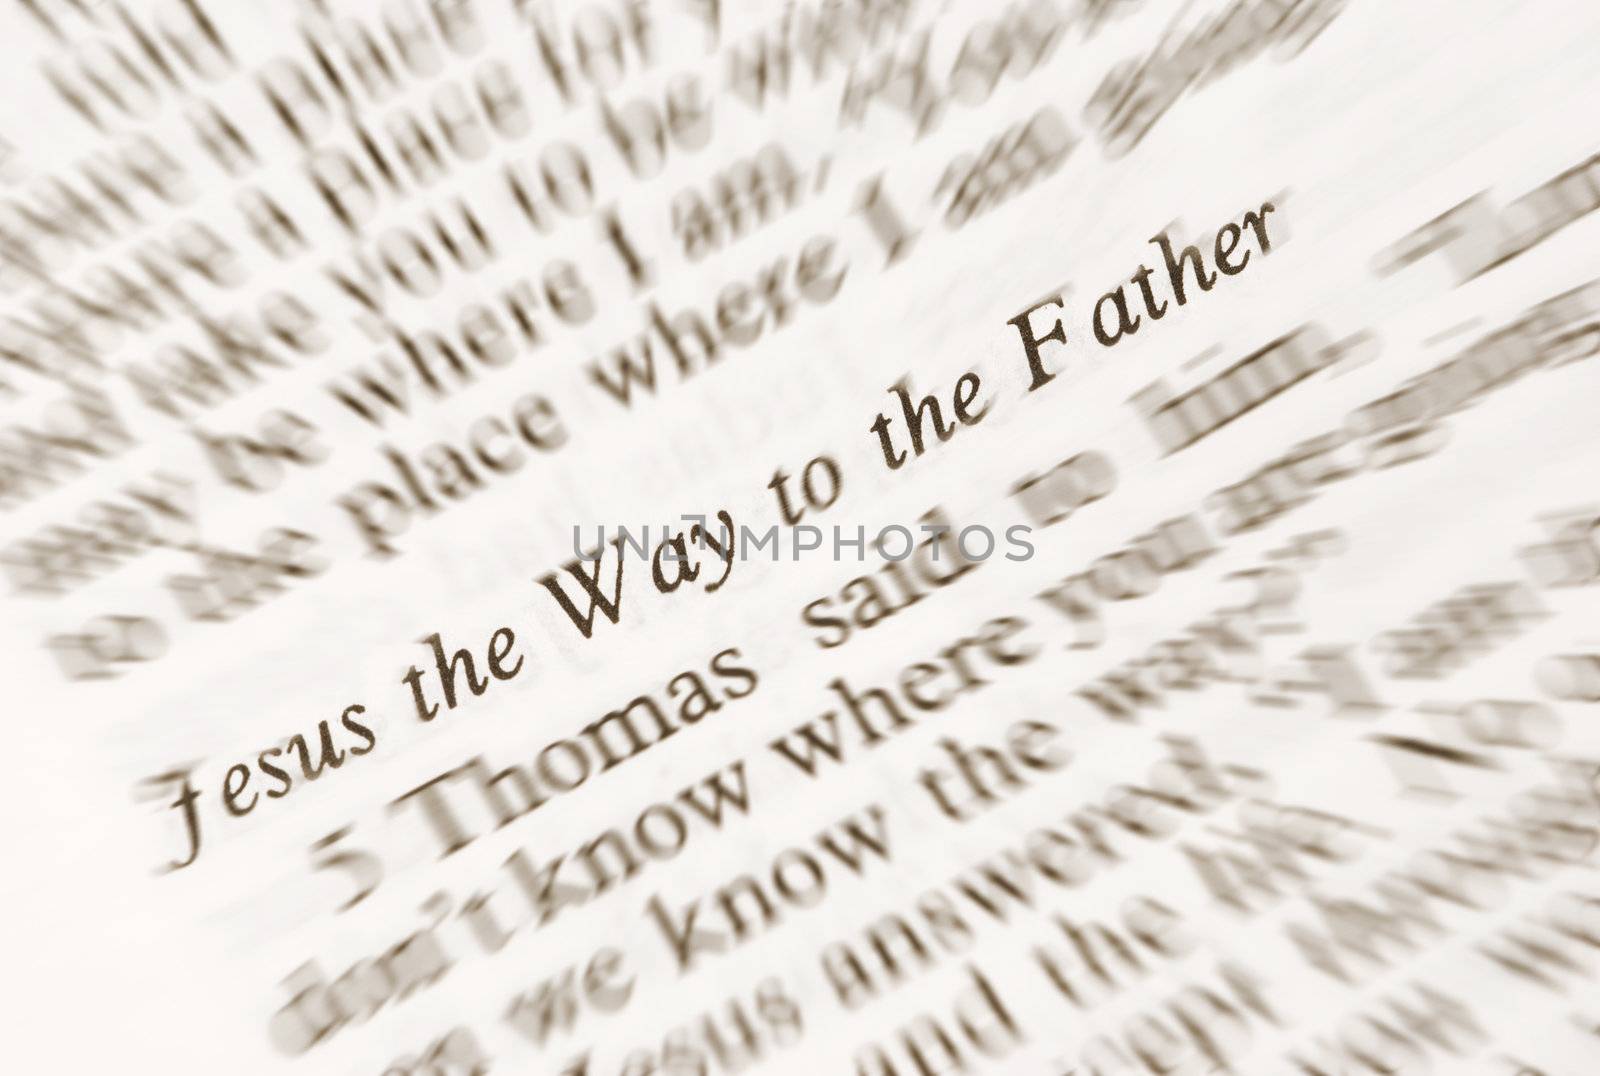 Jesus the Way to the Fahter by Kuzma